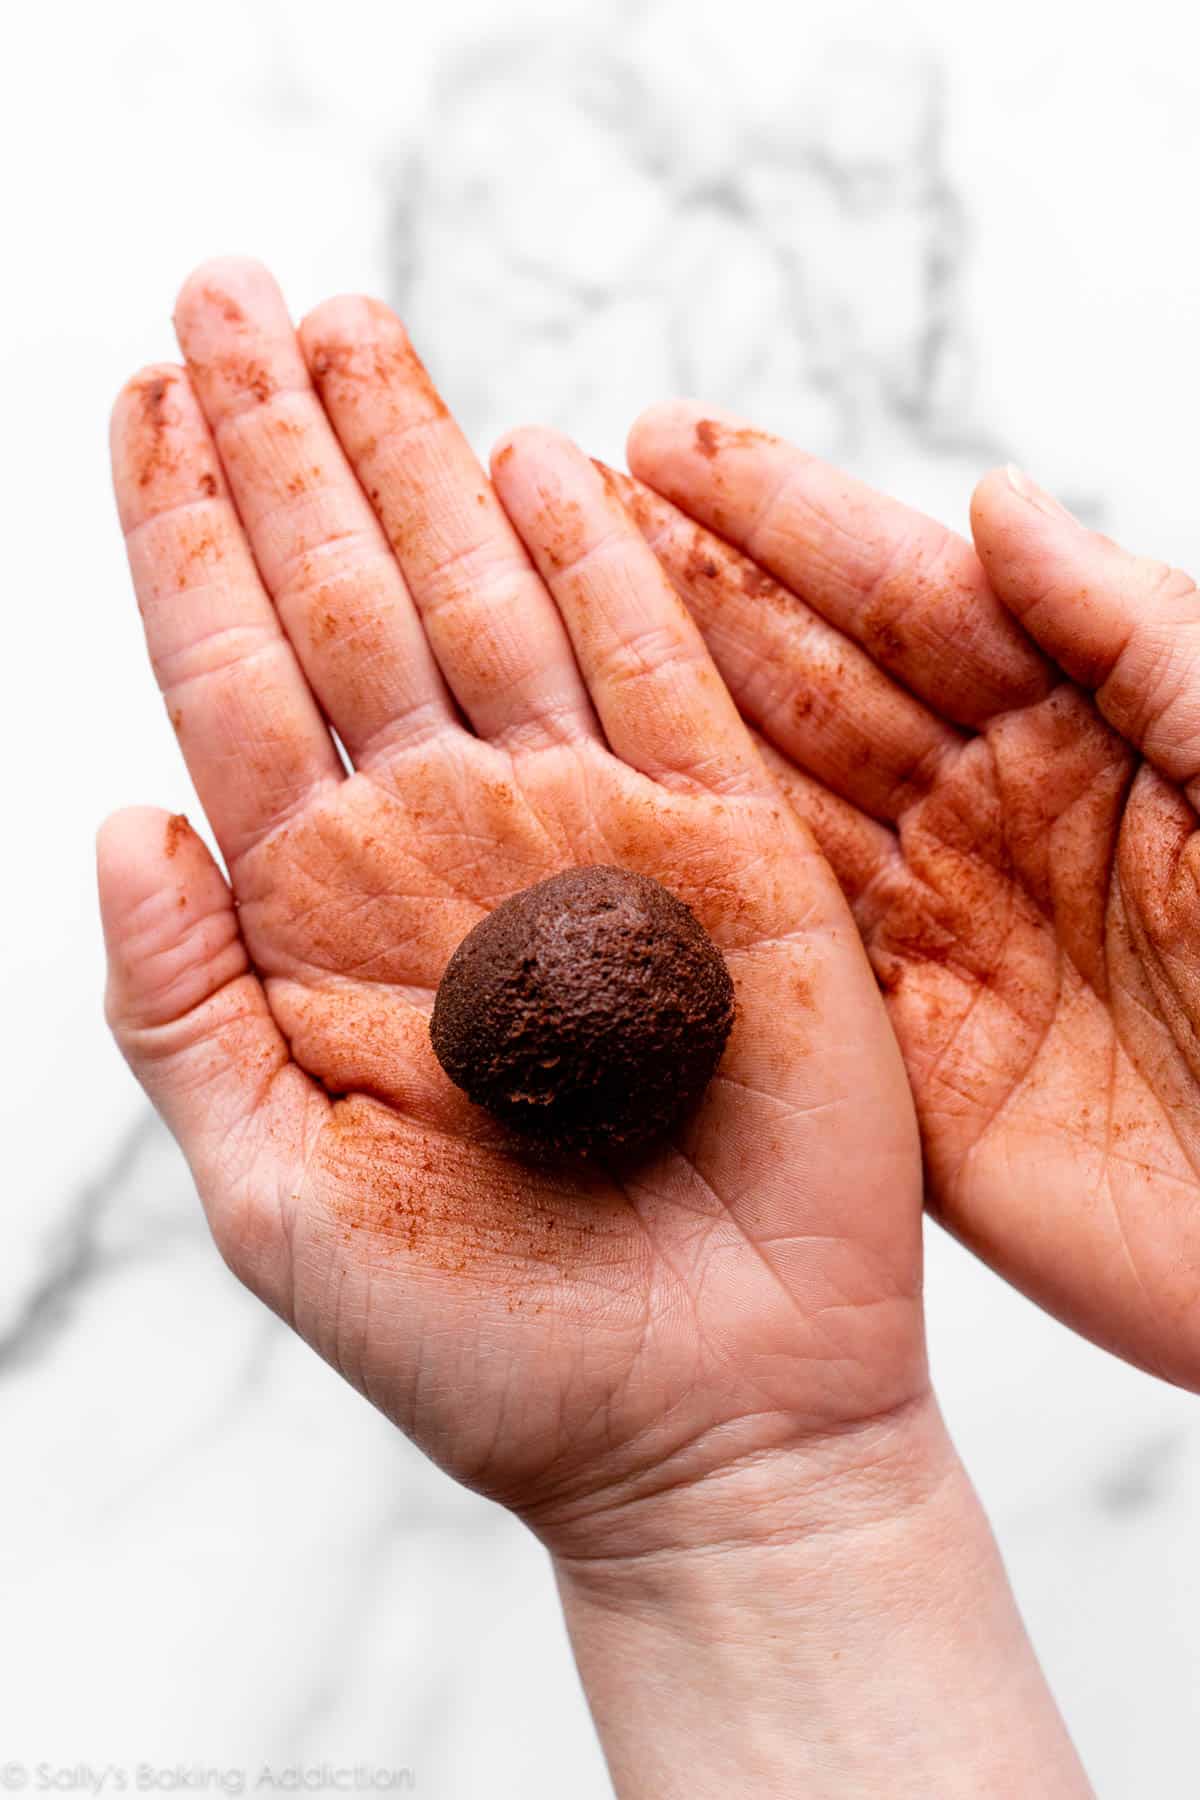 brownie dough ball in hands to display how messy the shaping can be